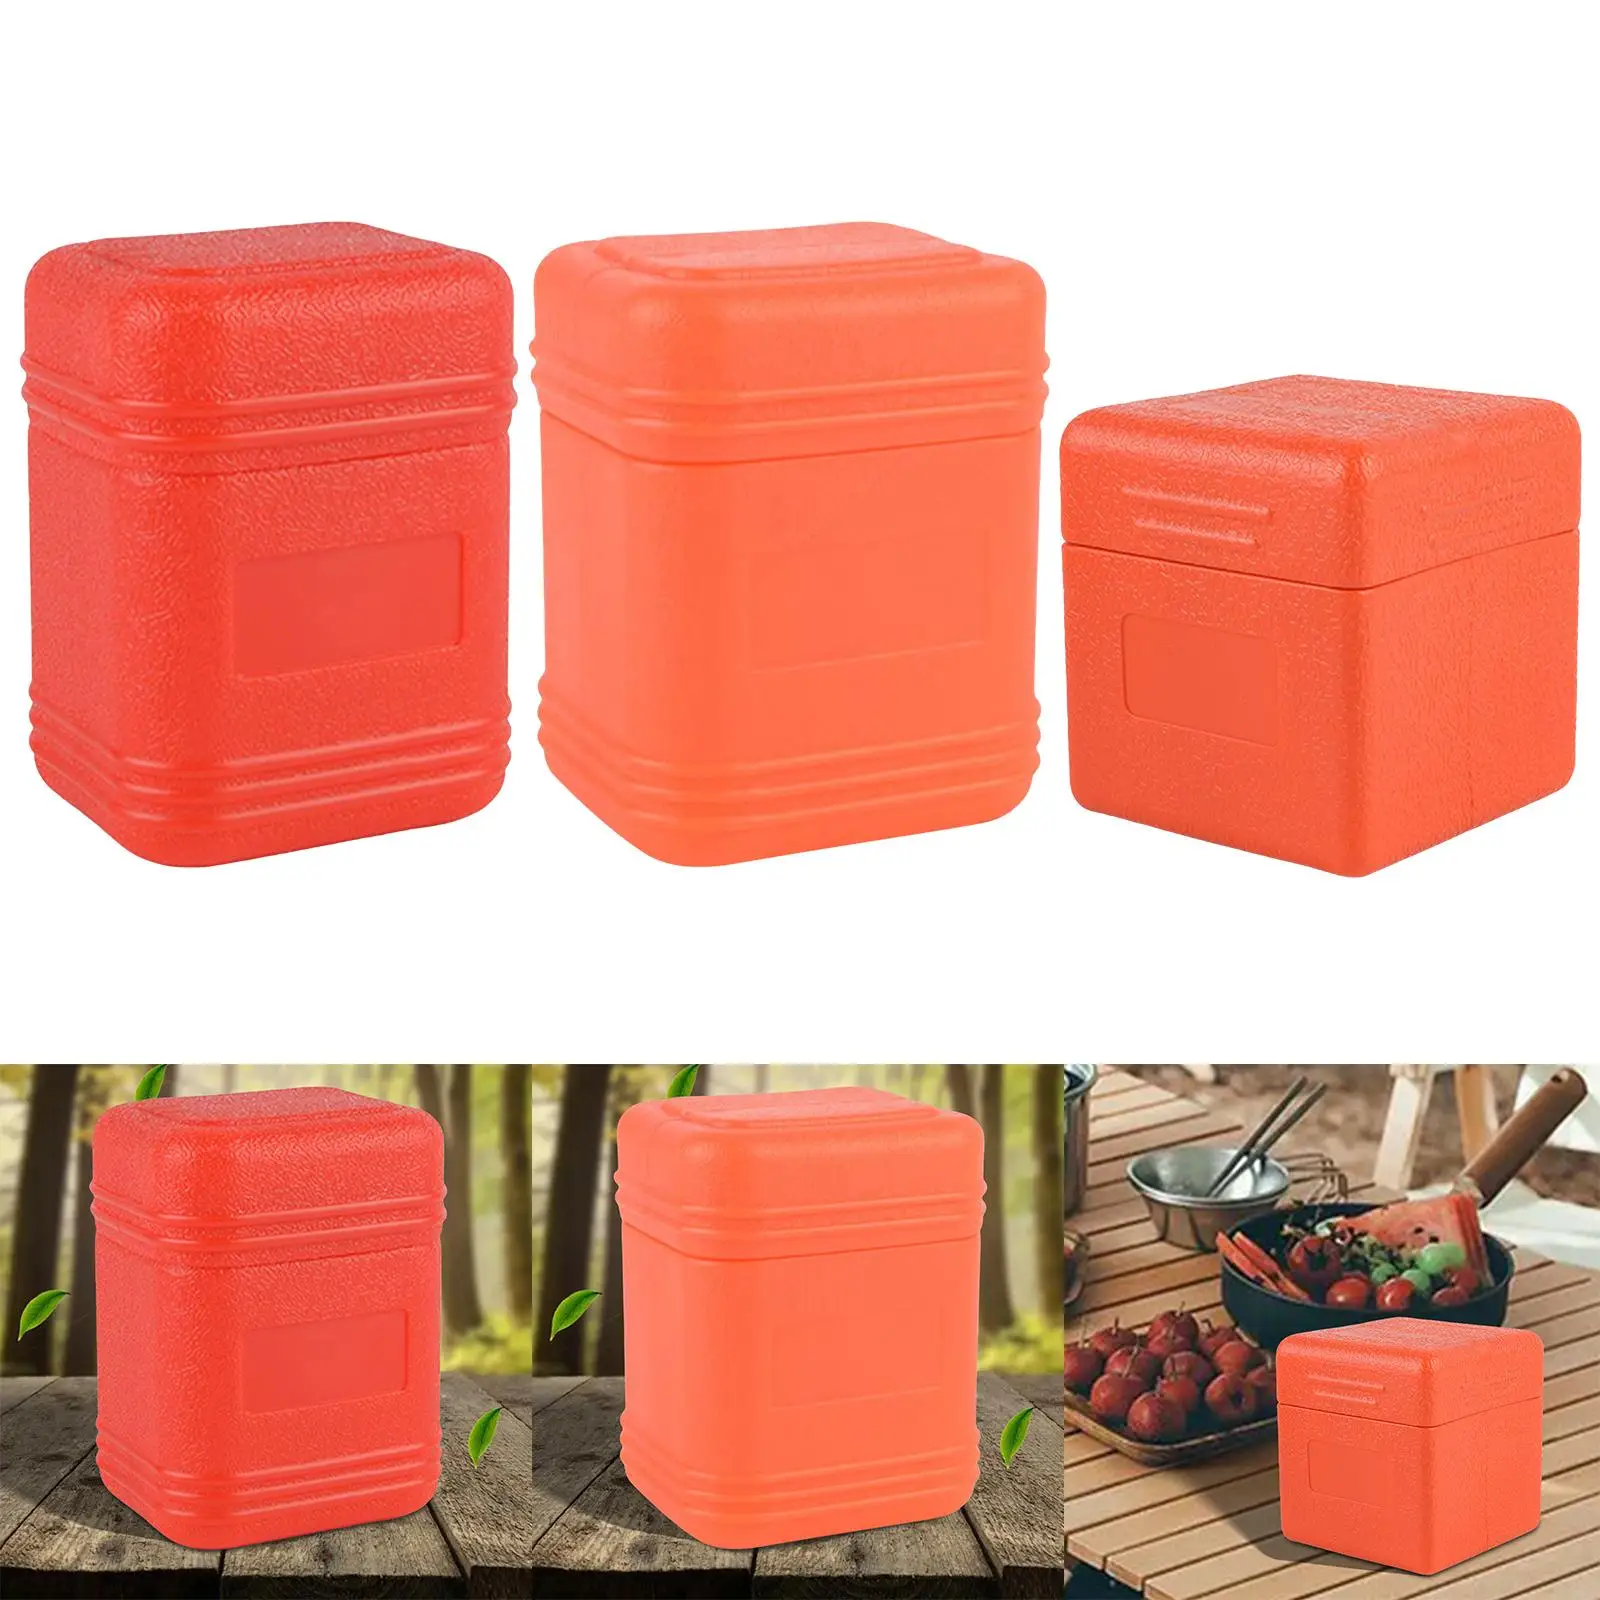 Portable Camping Stove Storage Box Hard Furnace Accessories Gas Grill Case Carry for Boating Outdoor Camping Fishing Activities